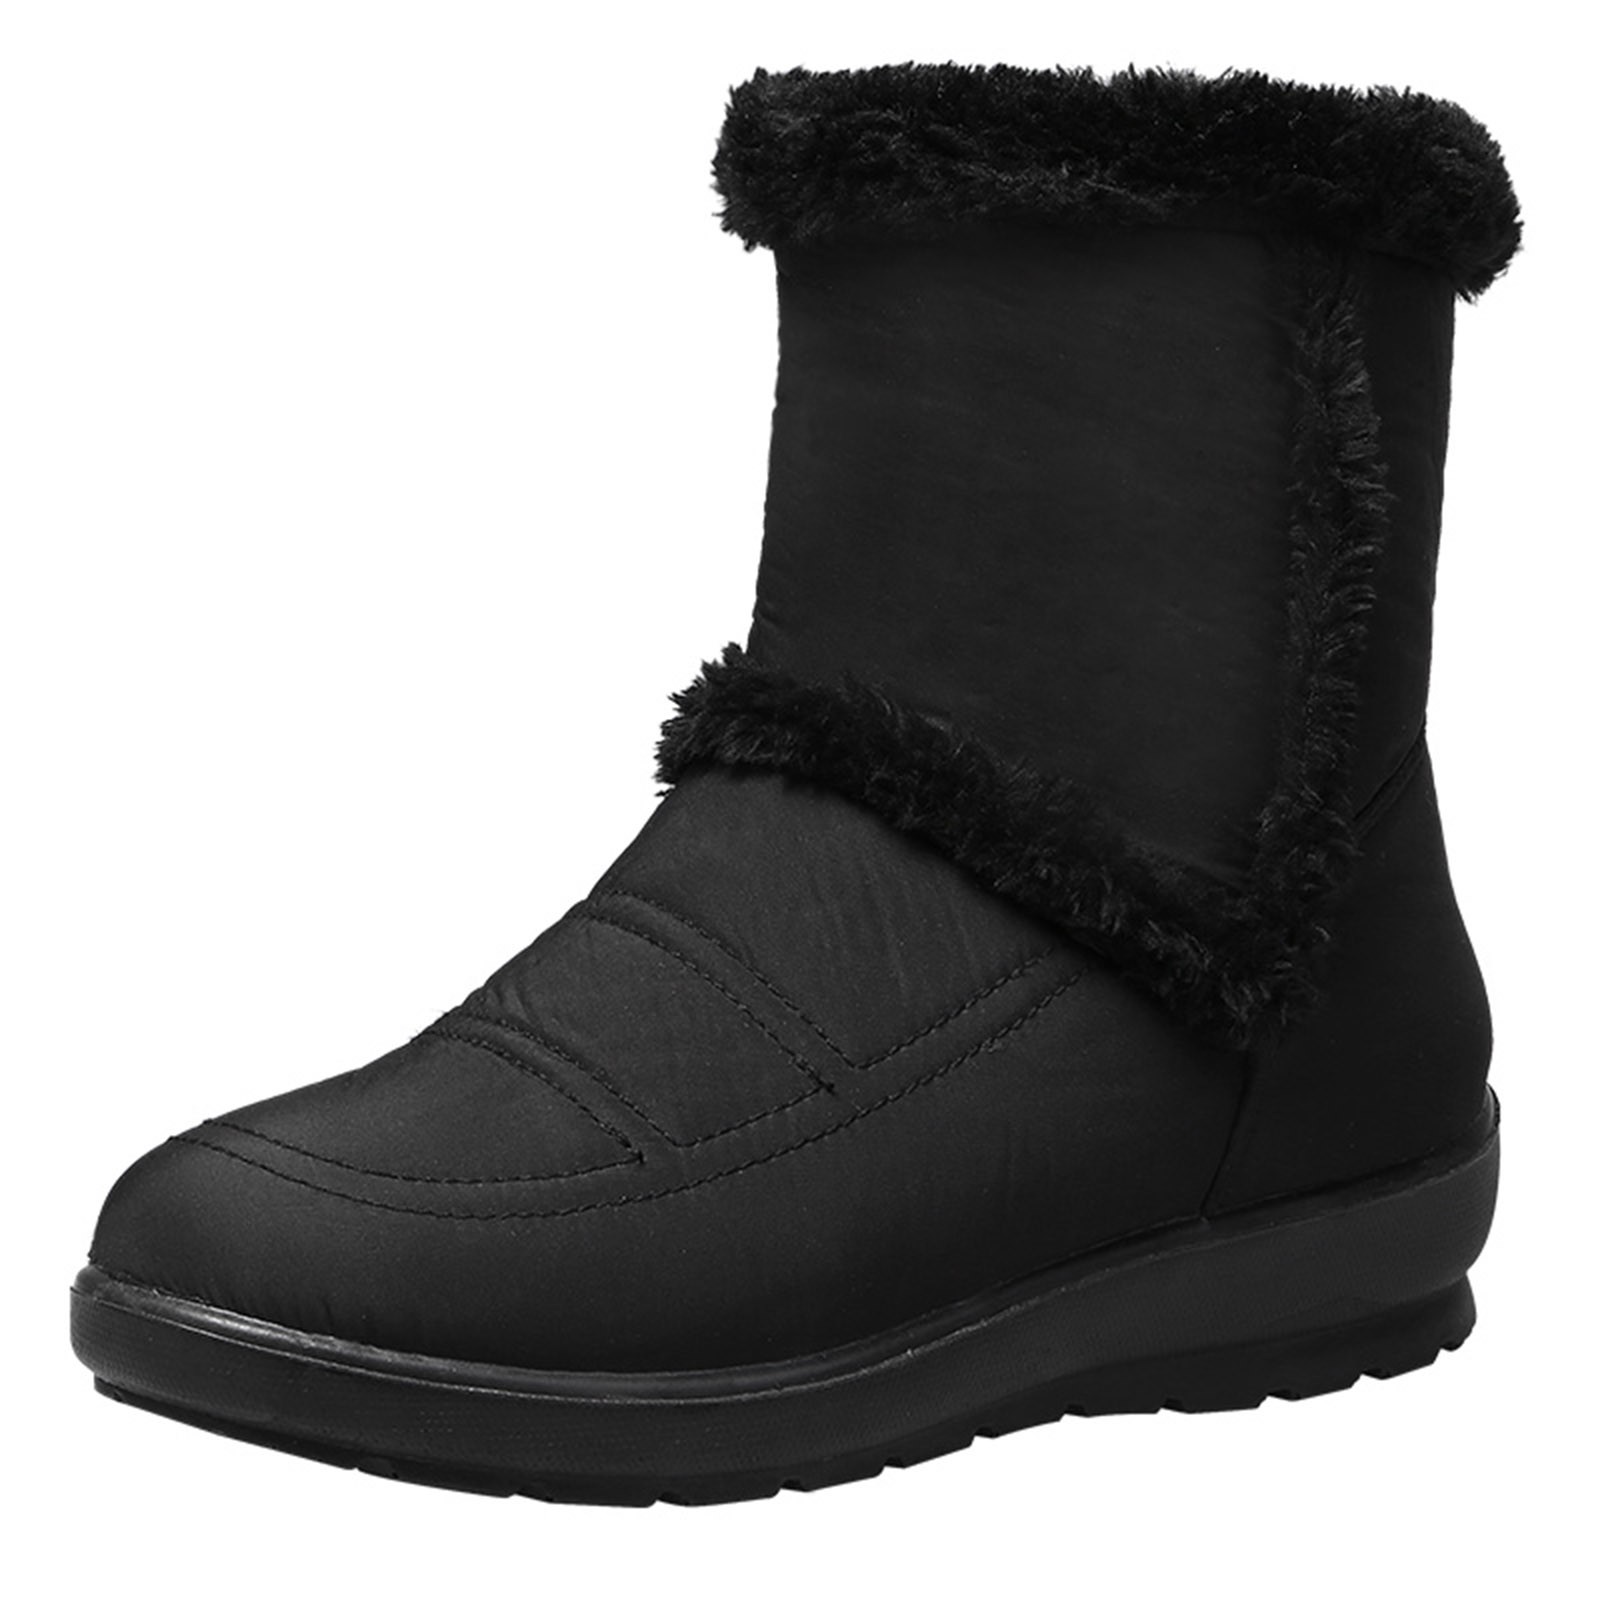 Fashion Snow Boots for Women Flat Womens Winter Snow Boots Lined Warm ...